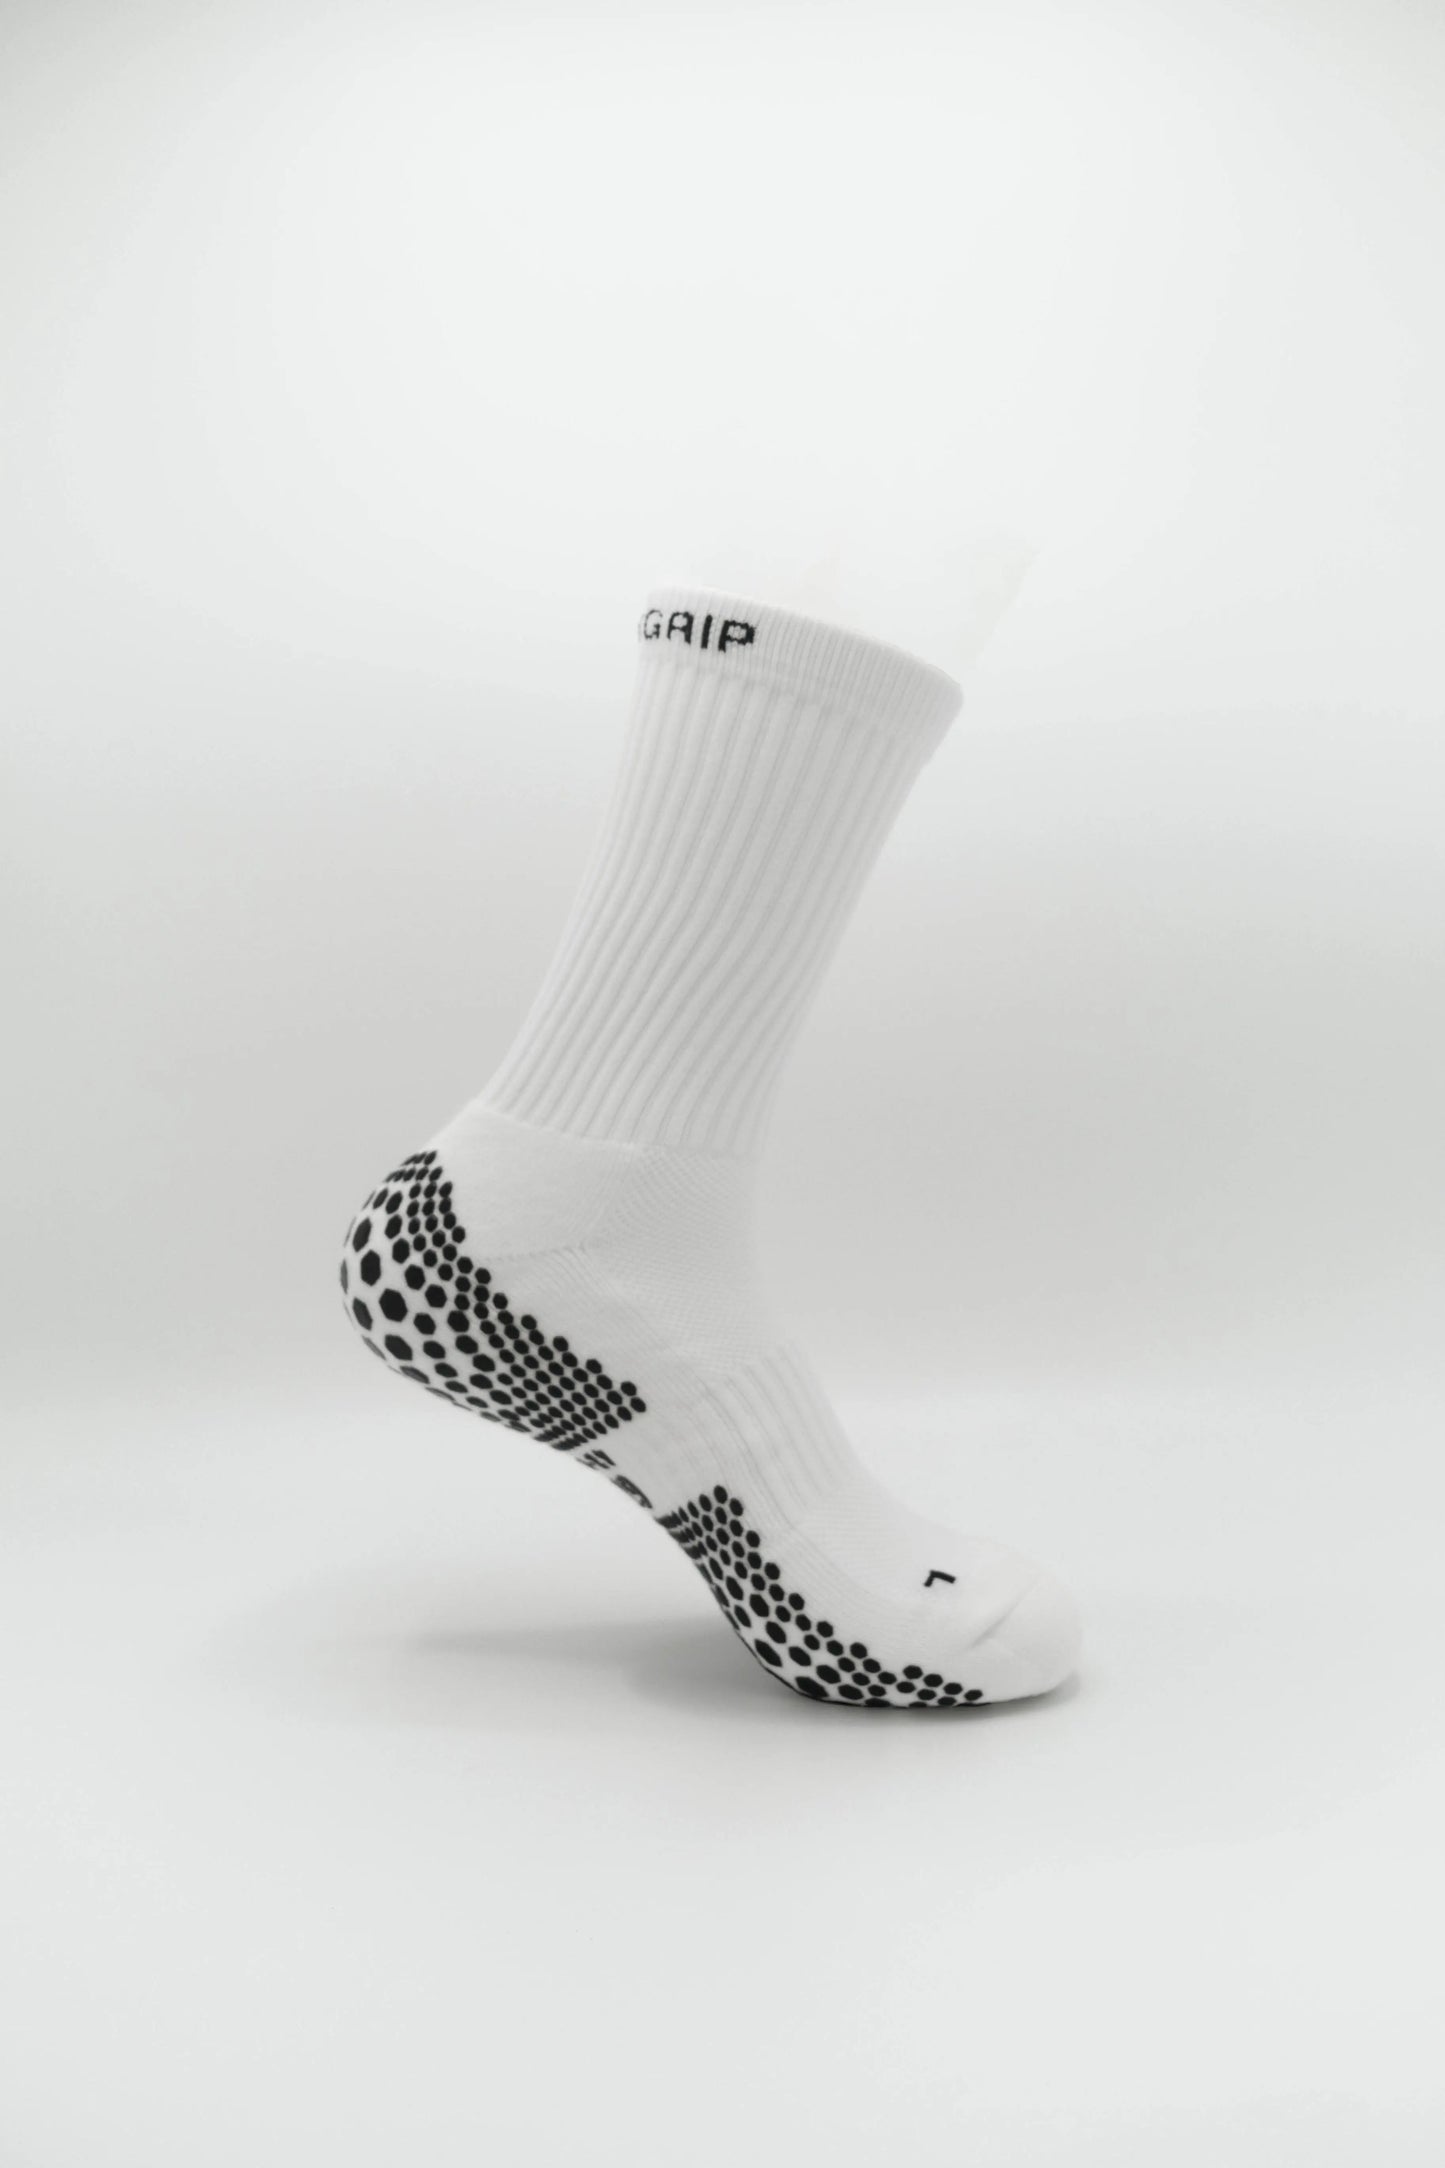 White GRIP Socks Crew - Right Side View, Optimal Comfort, Scientific Grip, and Performance Enhancement for Athletes